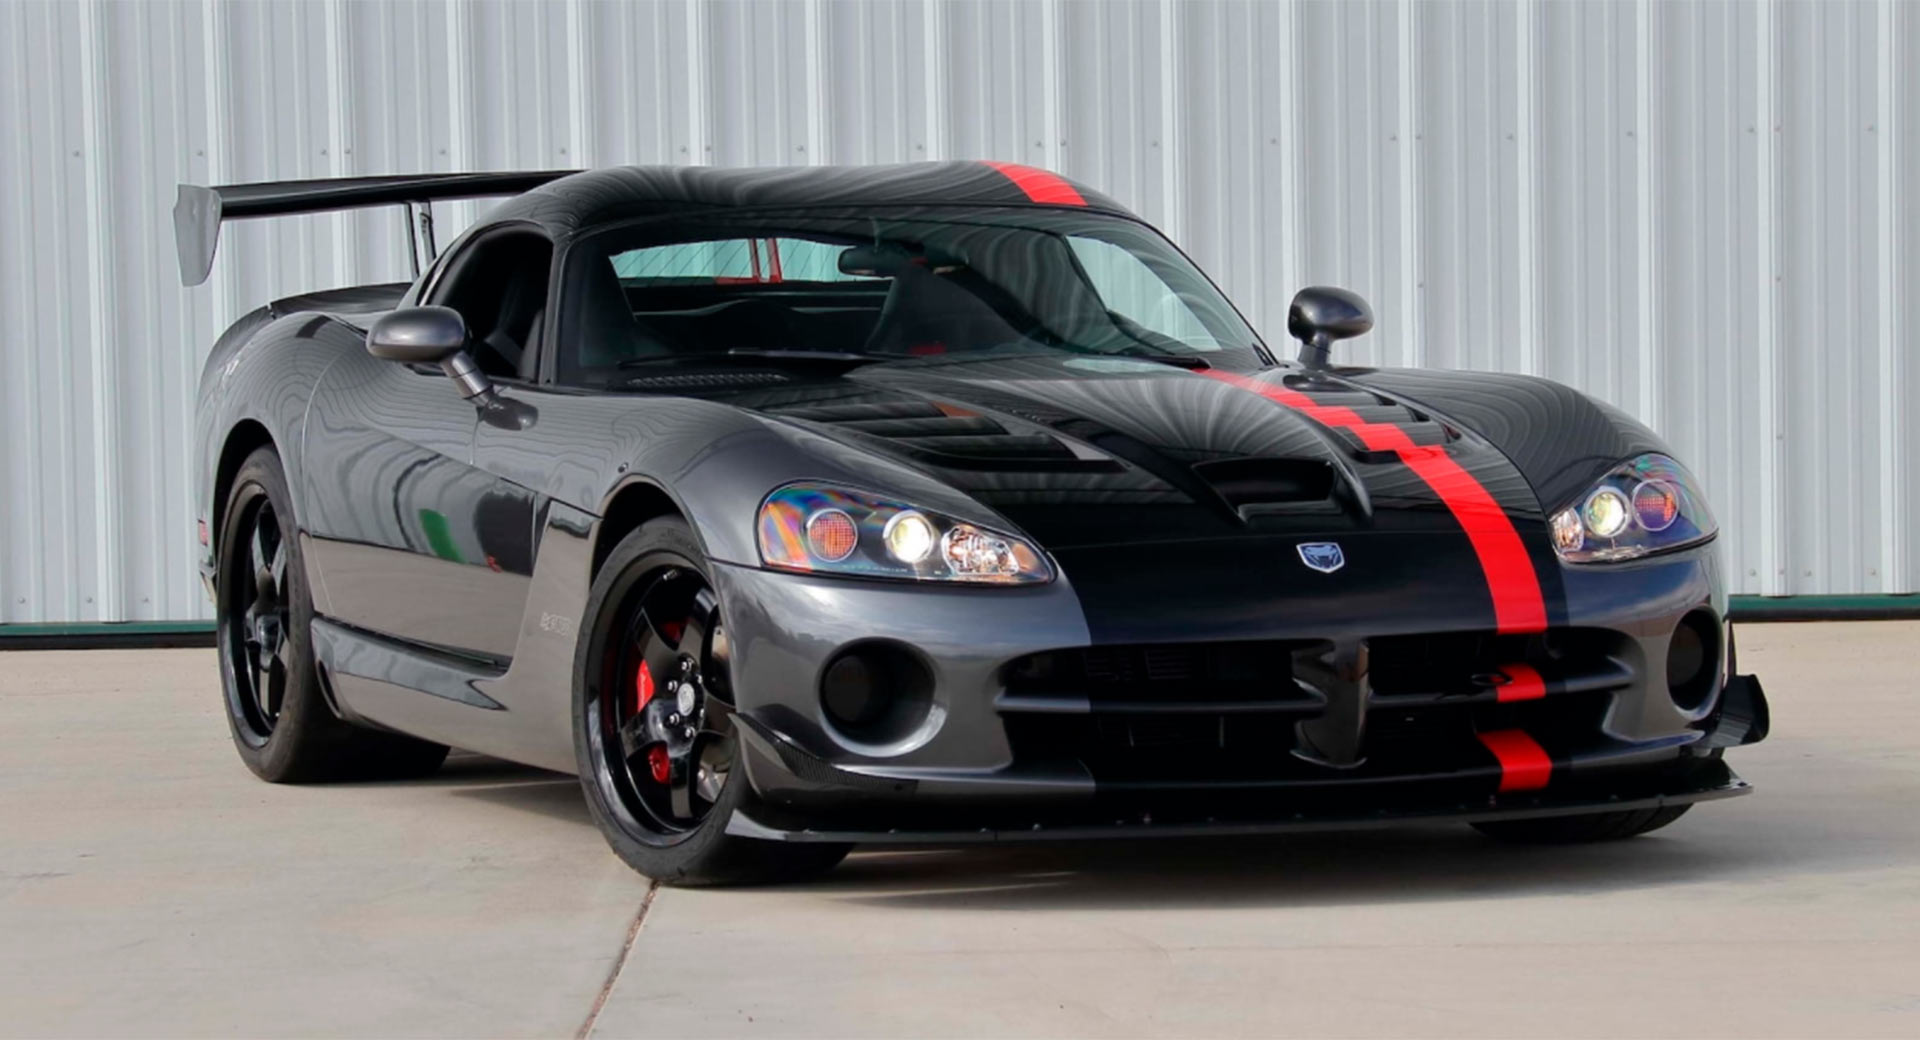 Now Is The Time To Buy A Low Mileage 09 Dodge Viper Acr Carscoops